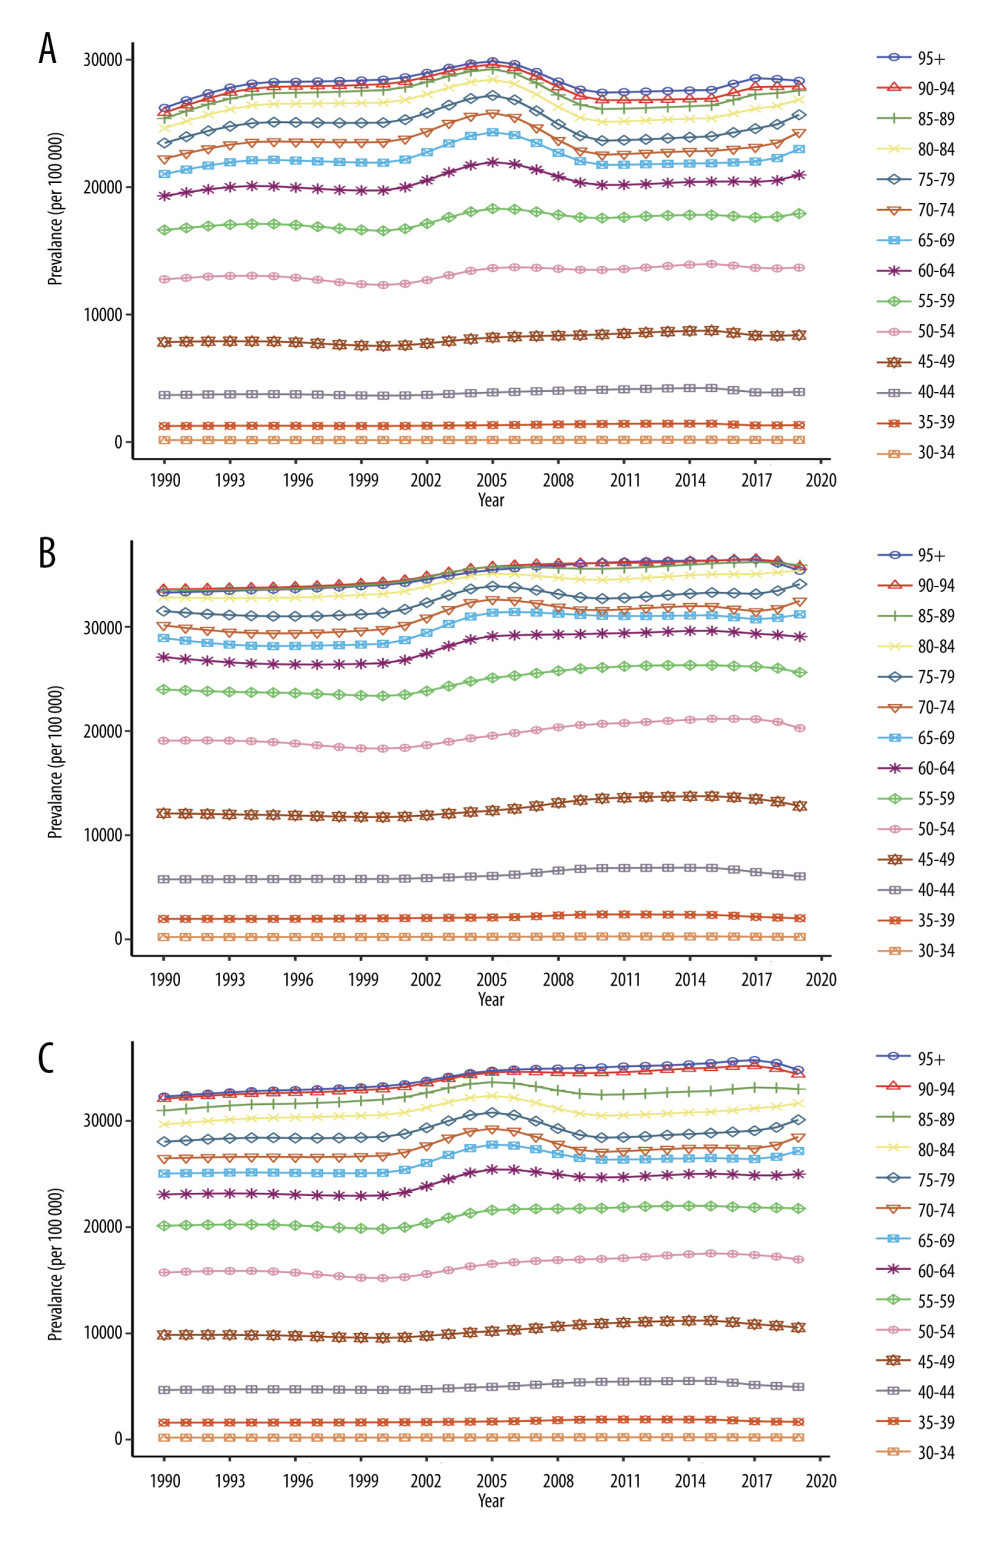 Long-term trends of age-specific variation of osteoarthritis prevalence in China from 1990 to 2019 for men (A), women (B), and both sexes (C). (Created by R software, version 4.2.1, R Foundation for Statistical Computing).